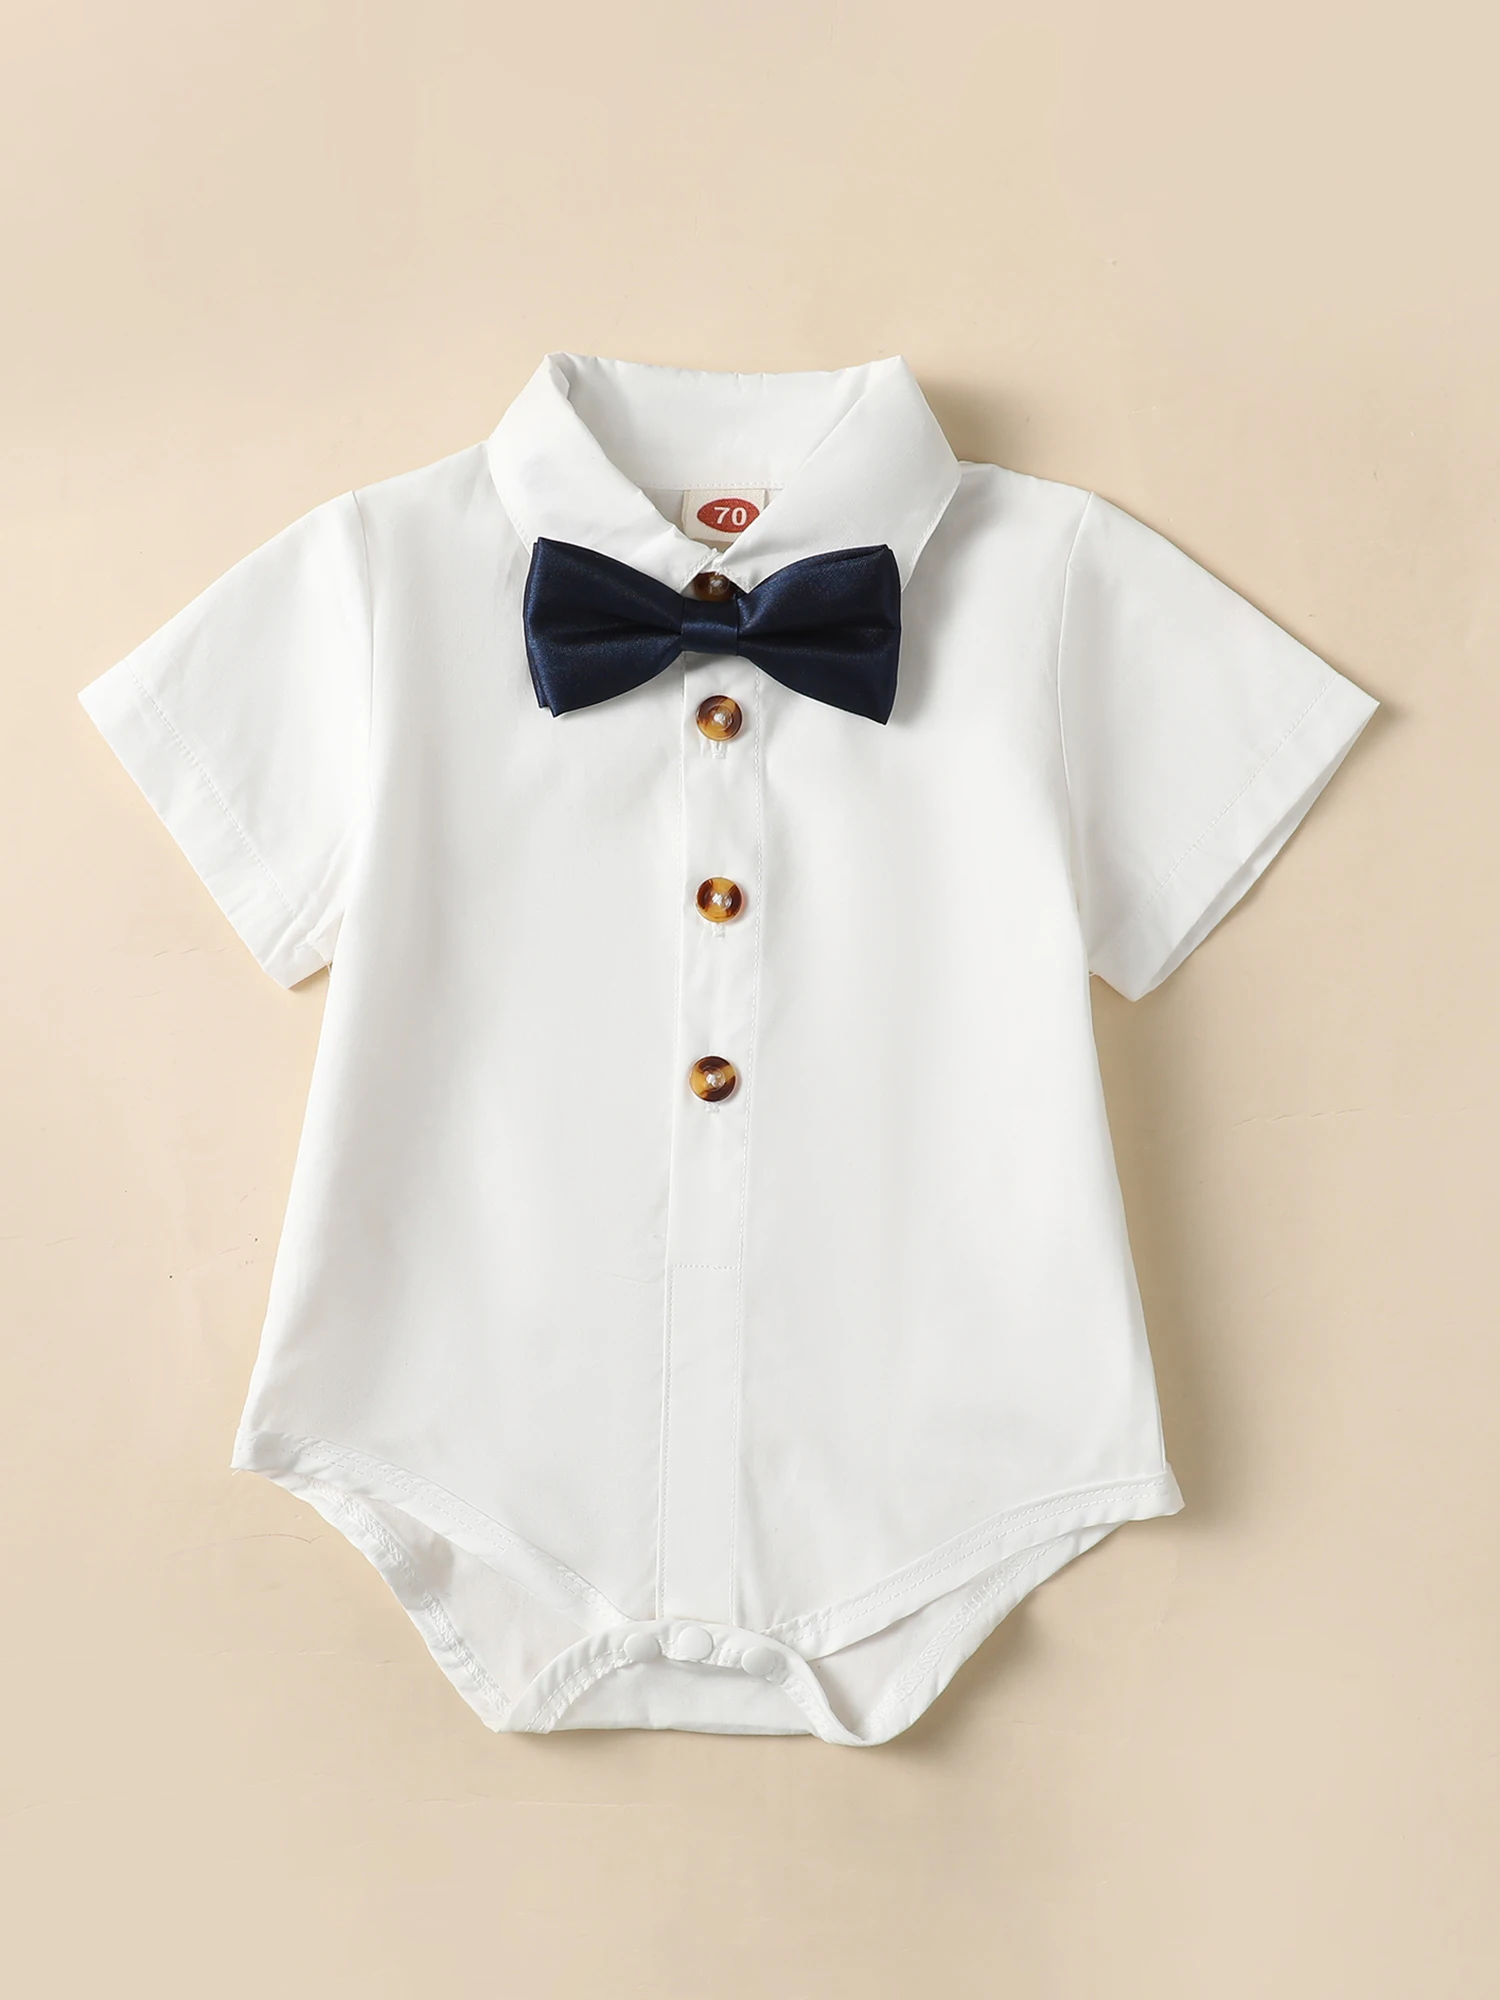 

Adorable 2-Piece Summer Set for Toddler Boys Short Sleeve Button Down Shirt with Bowtie and Suspender Shorts by RUIBBWAN